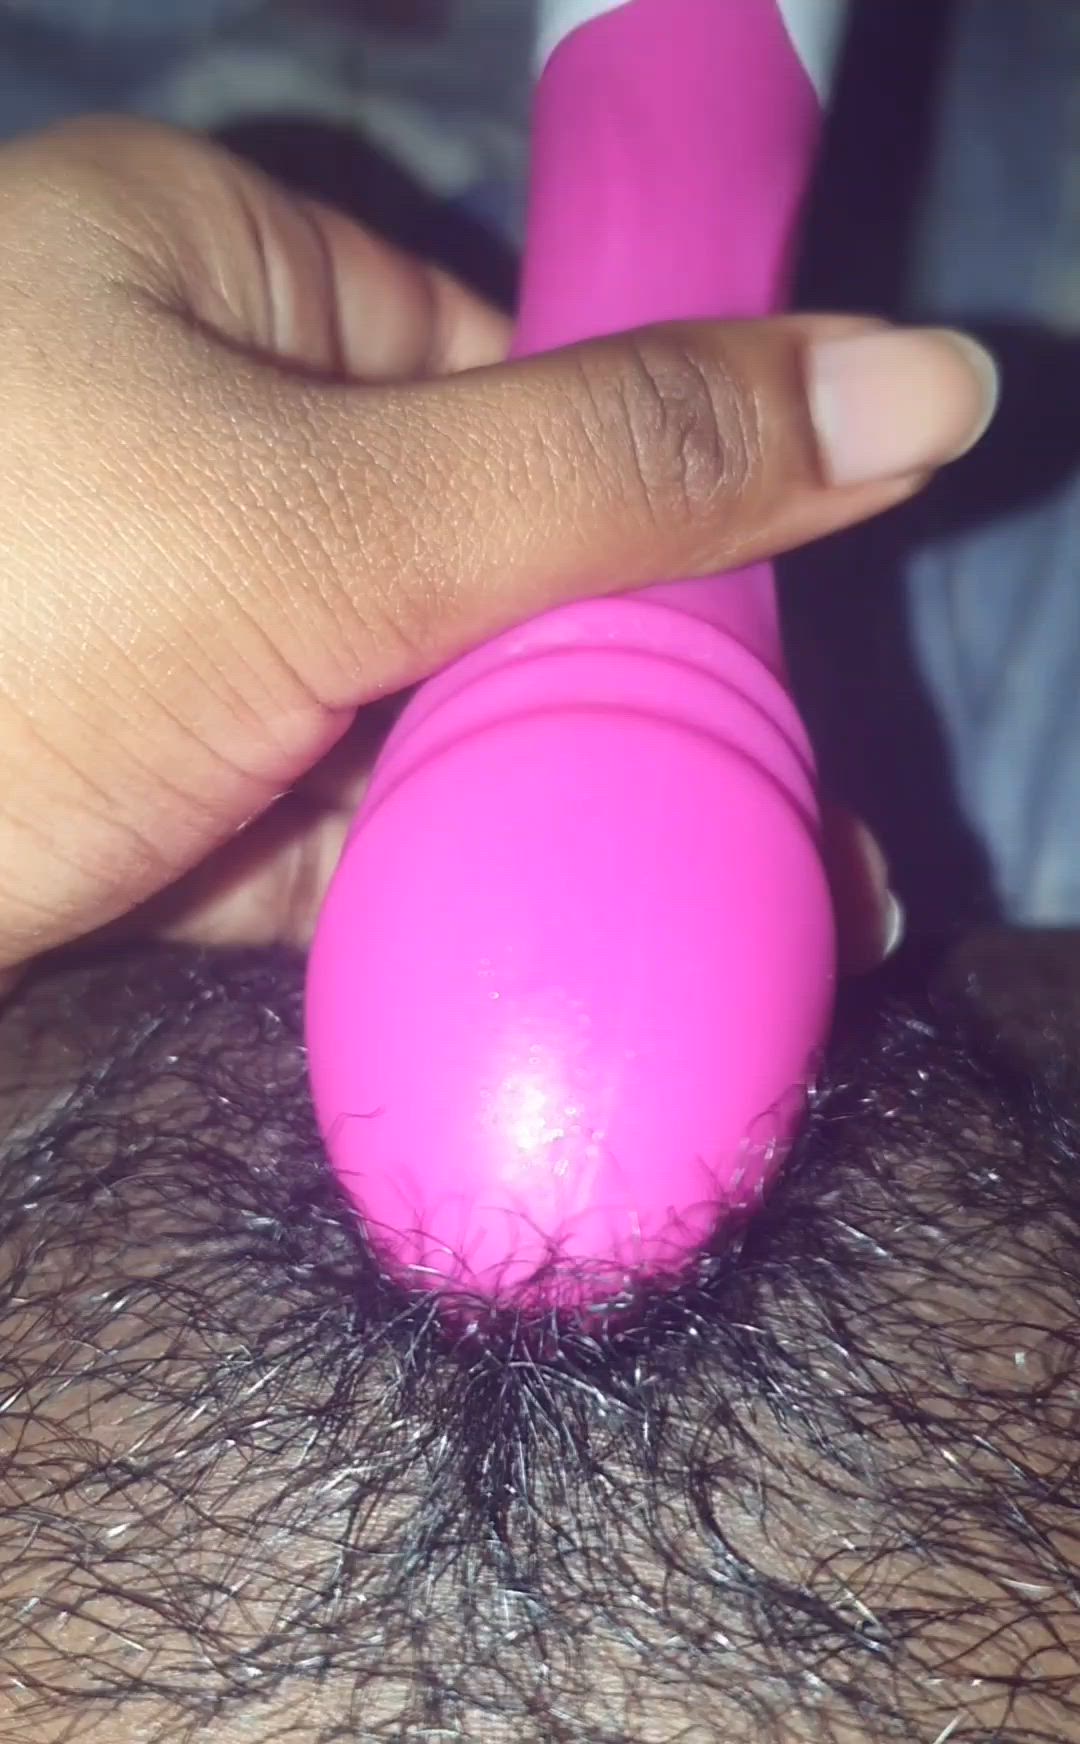 Pussy porn video with onlyfans model Nur <strong>@nurampart</strong>